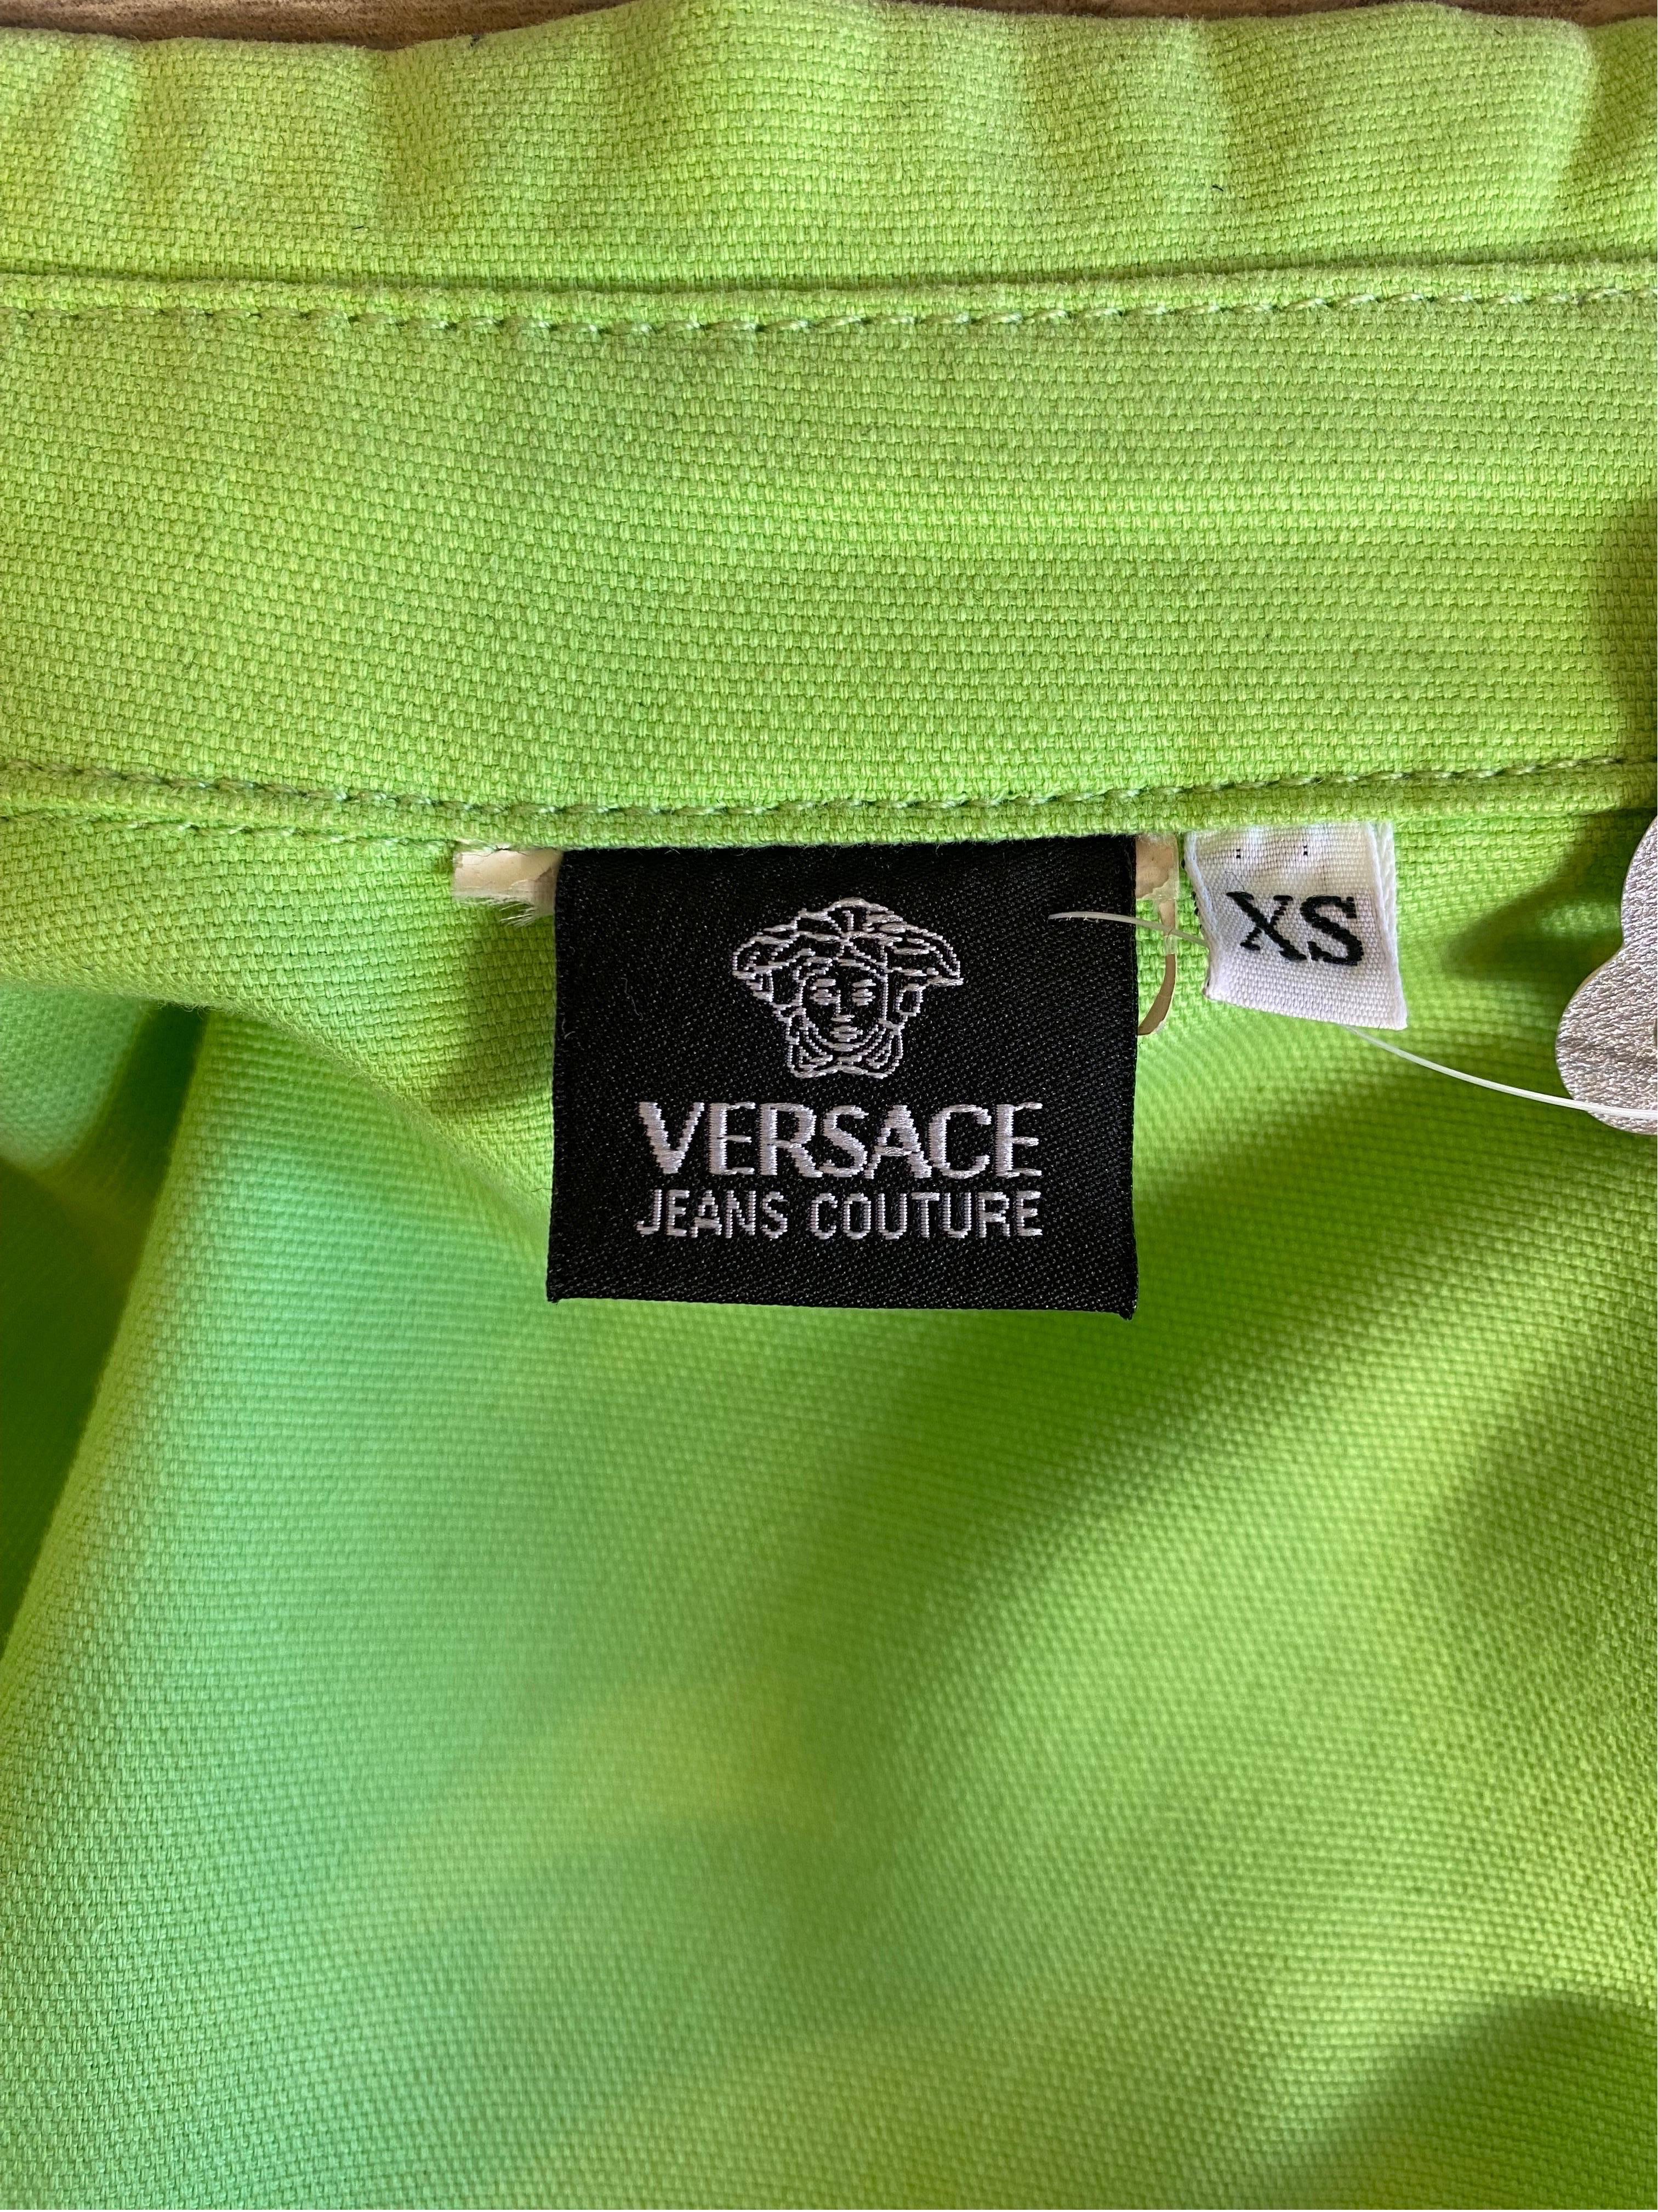 Versace Jeans Couture green lime Denim Jacket For Sale 4